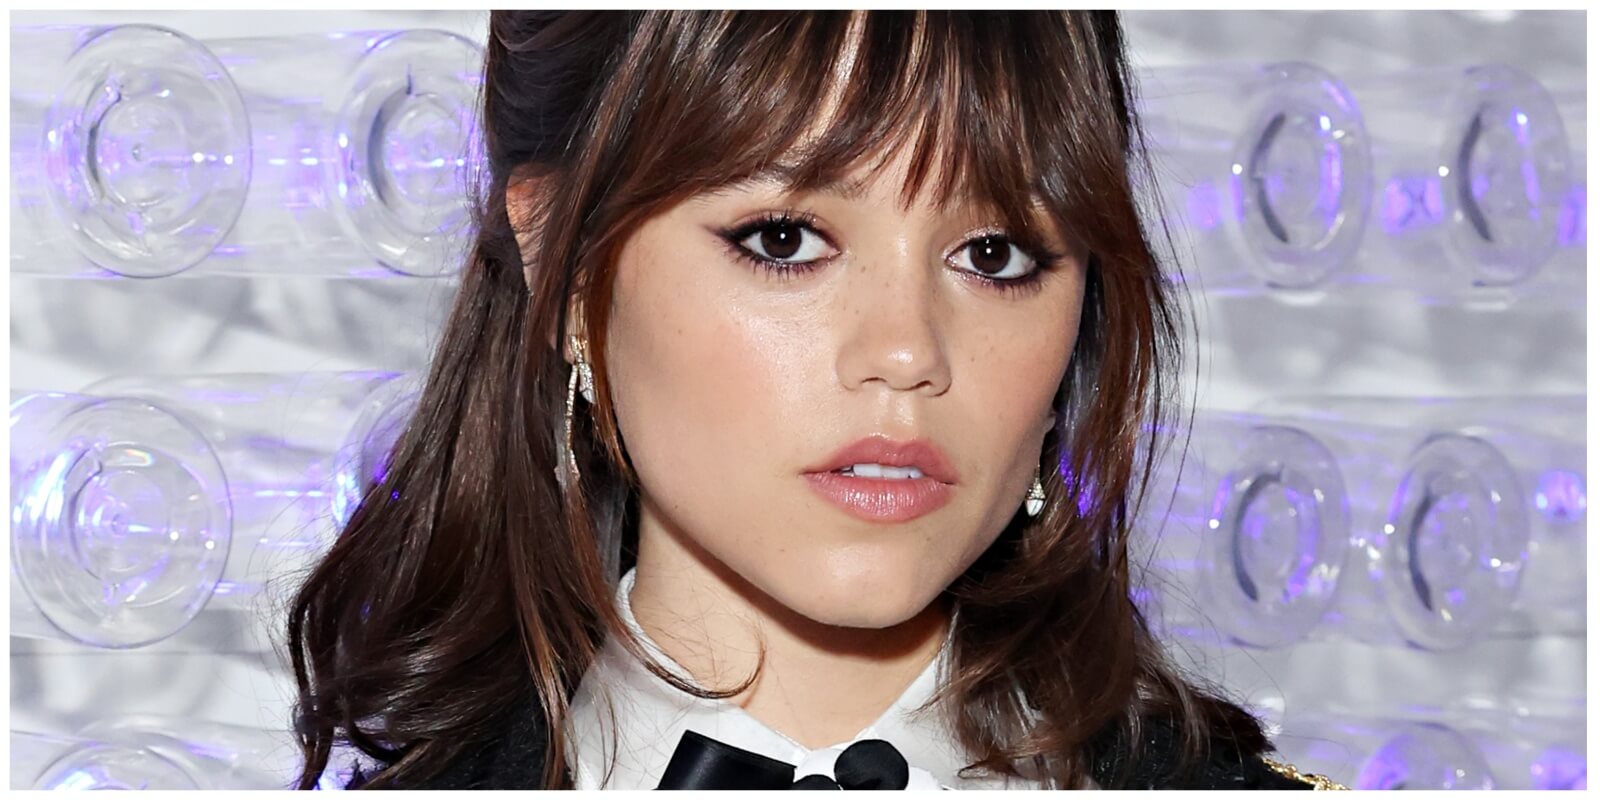 Jenna Ortega Has a Very Personal Reason for Being a UNAIDS Ambassador